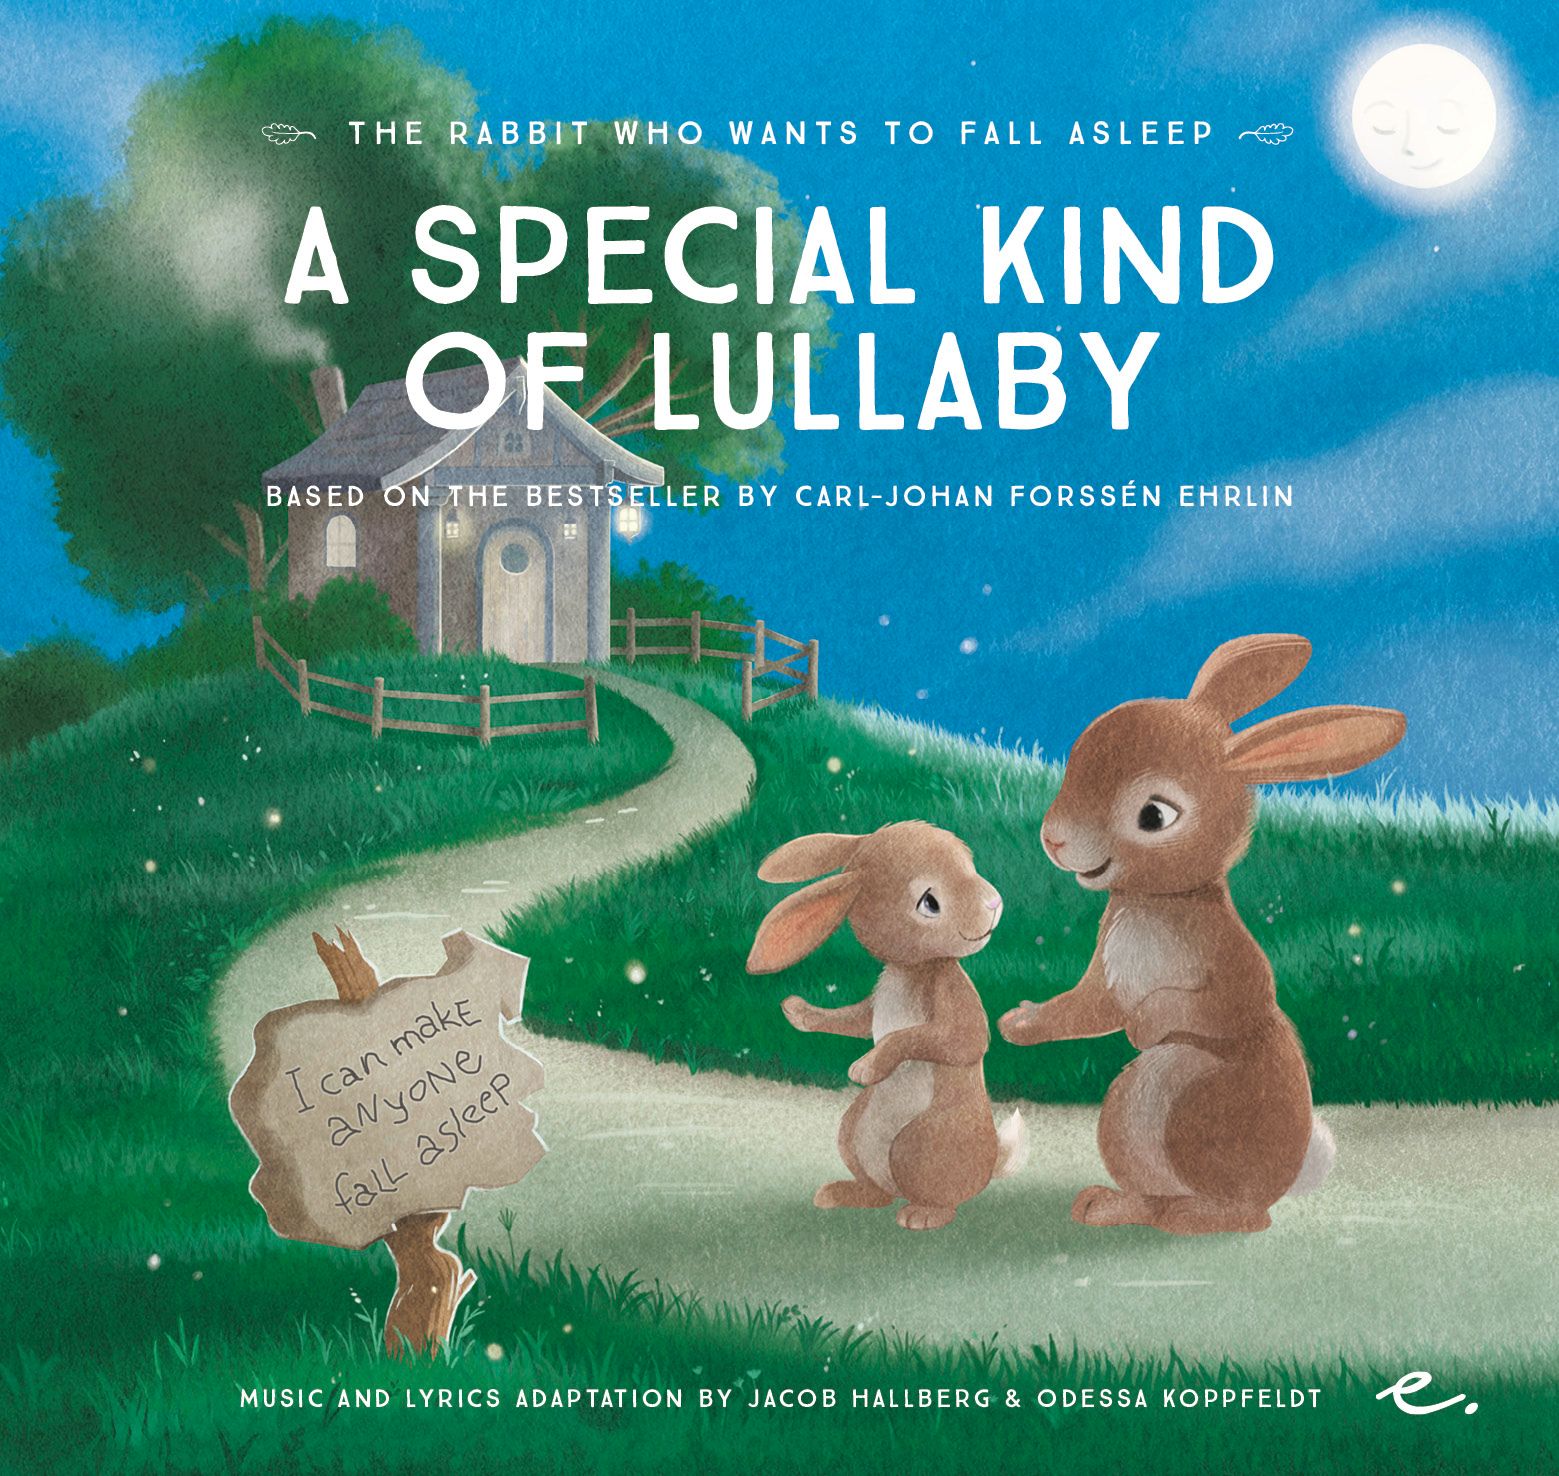 A Special Kind of Lullaby : The Rabbit Who Wants to Fall Asleep, audiobook by Carl-Johan Forssén Ehrlin